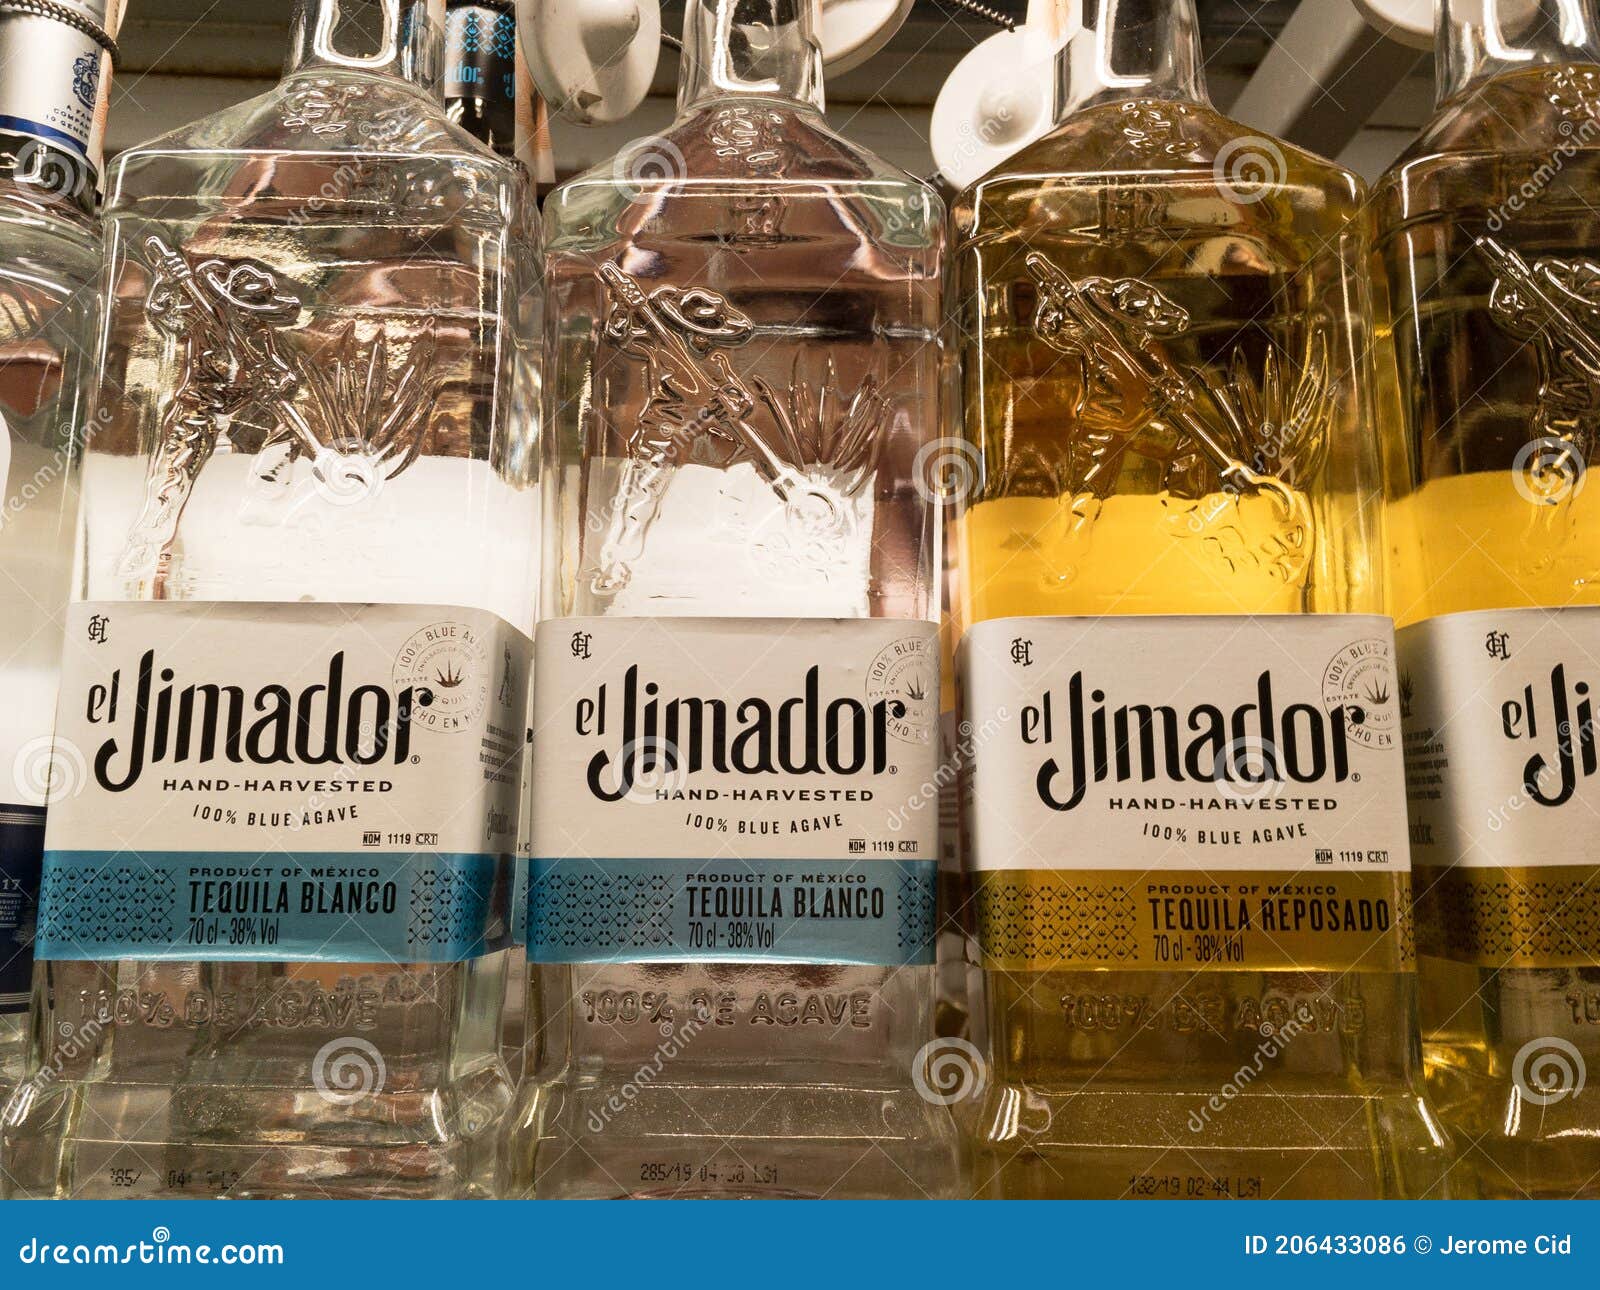 Tequila El Jimador Logo on One of Their Bottles. Editorial Photo - Image of  label, liquid: 206433086